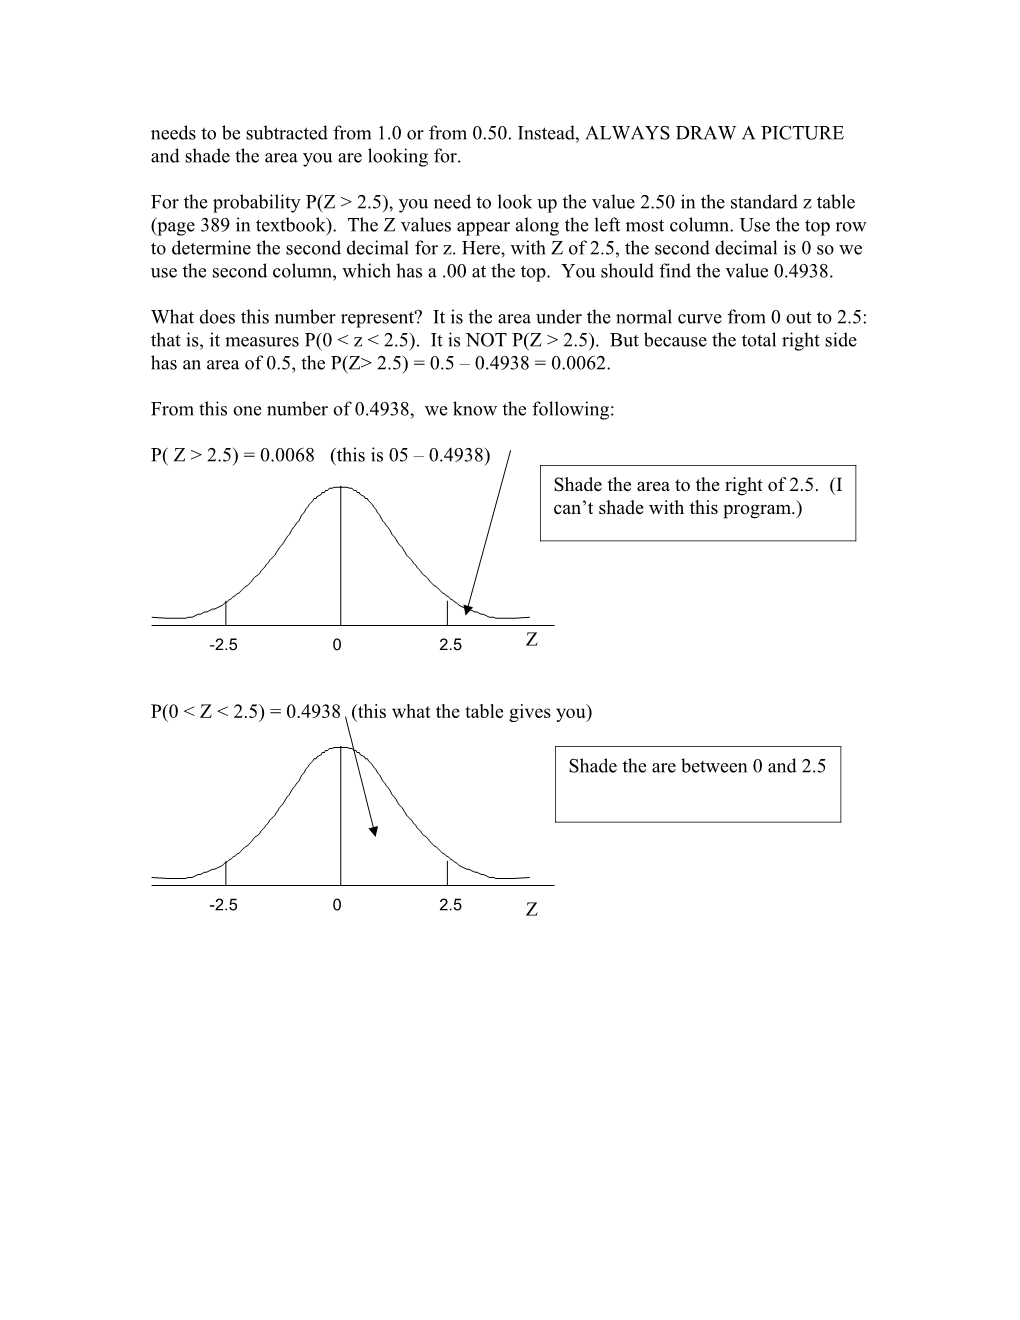 Notes on the Normal Probability Distribution